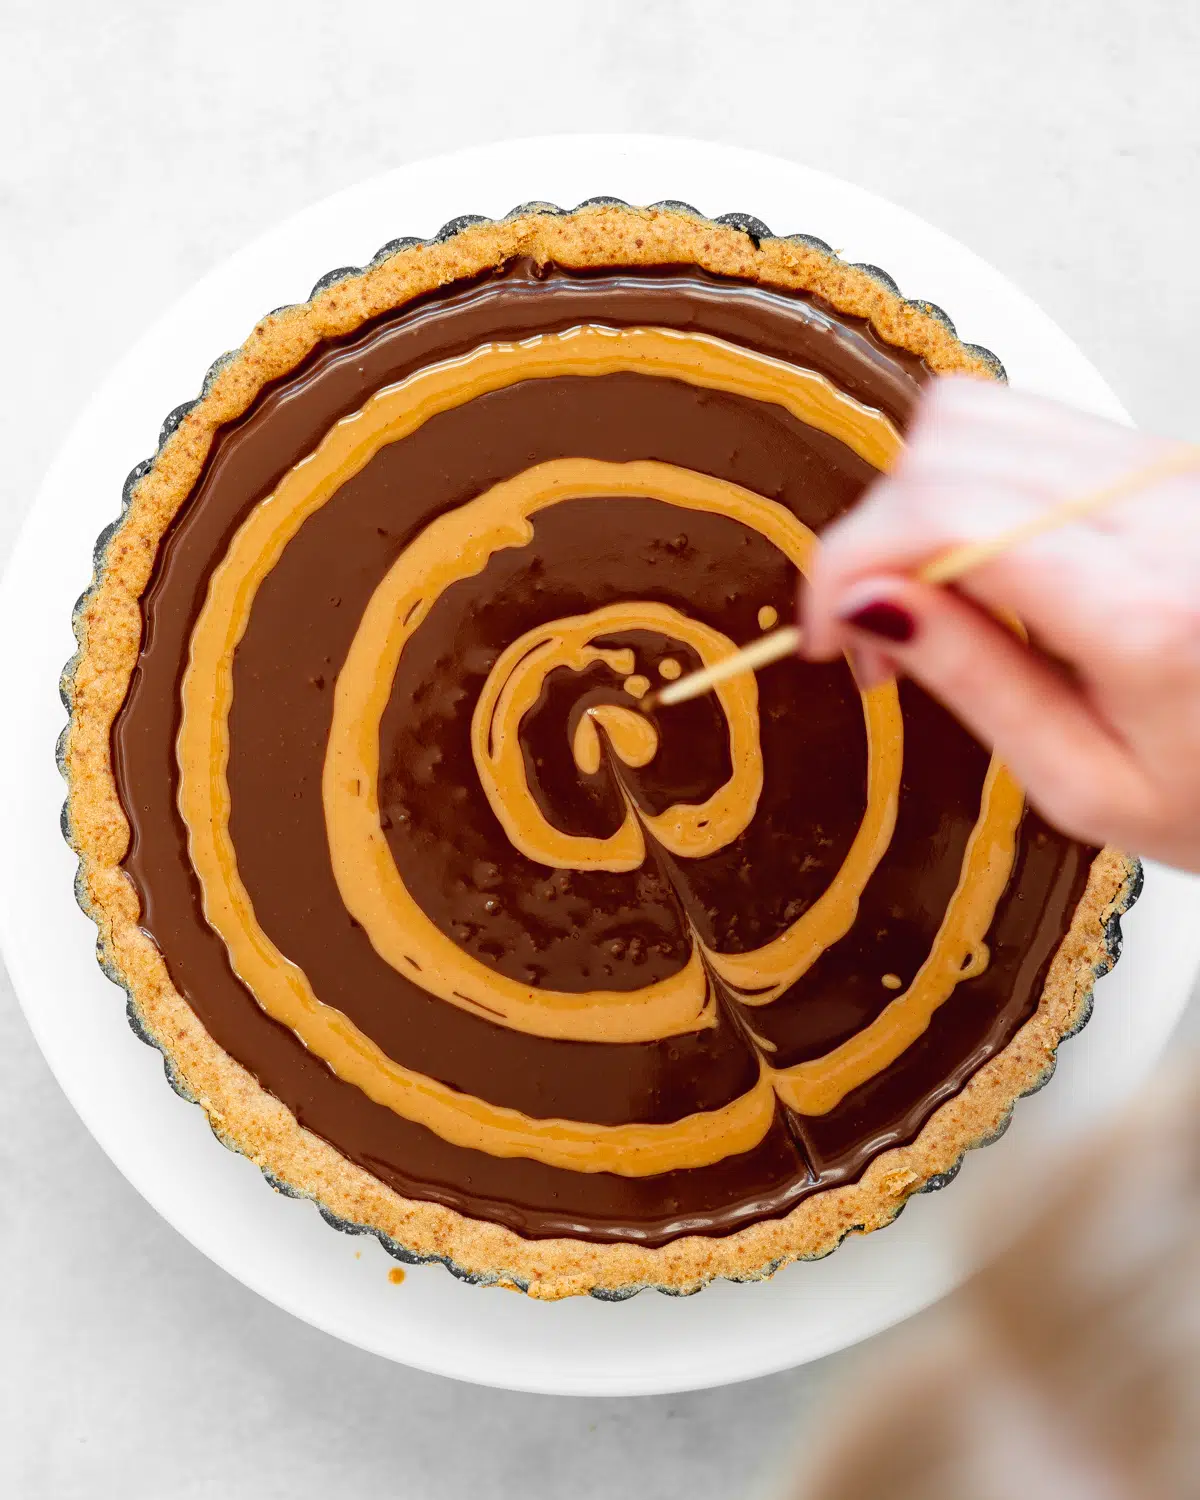 creating a swirl pattern with peanut butter on top of a chocolate tart using a skewer.